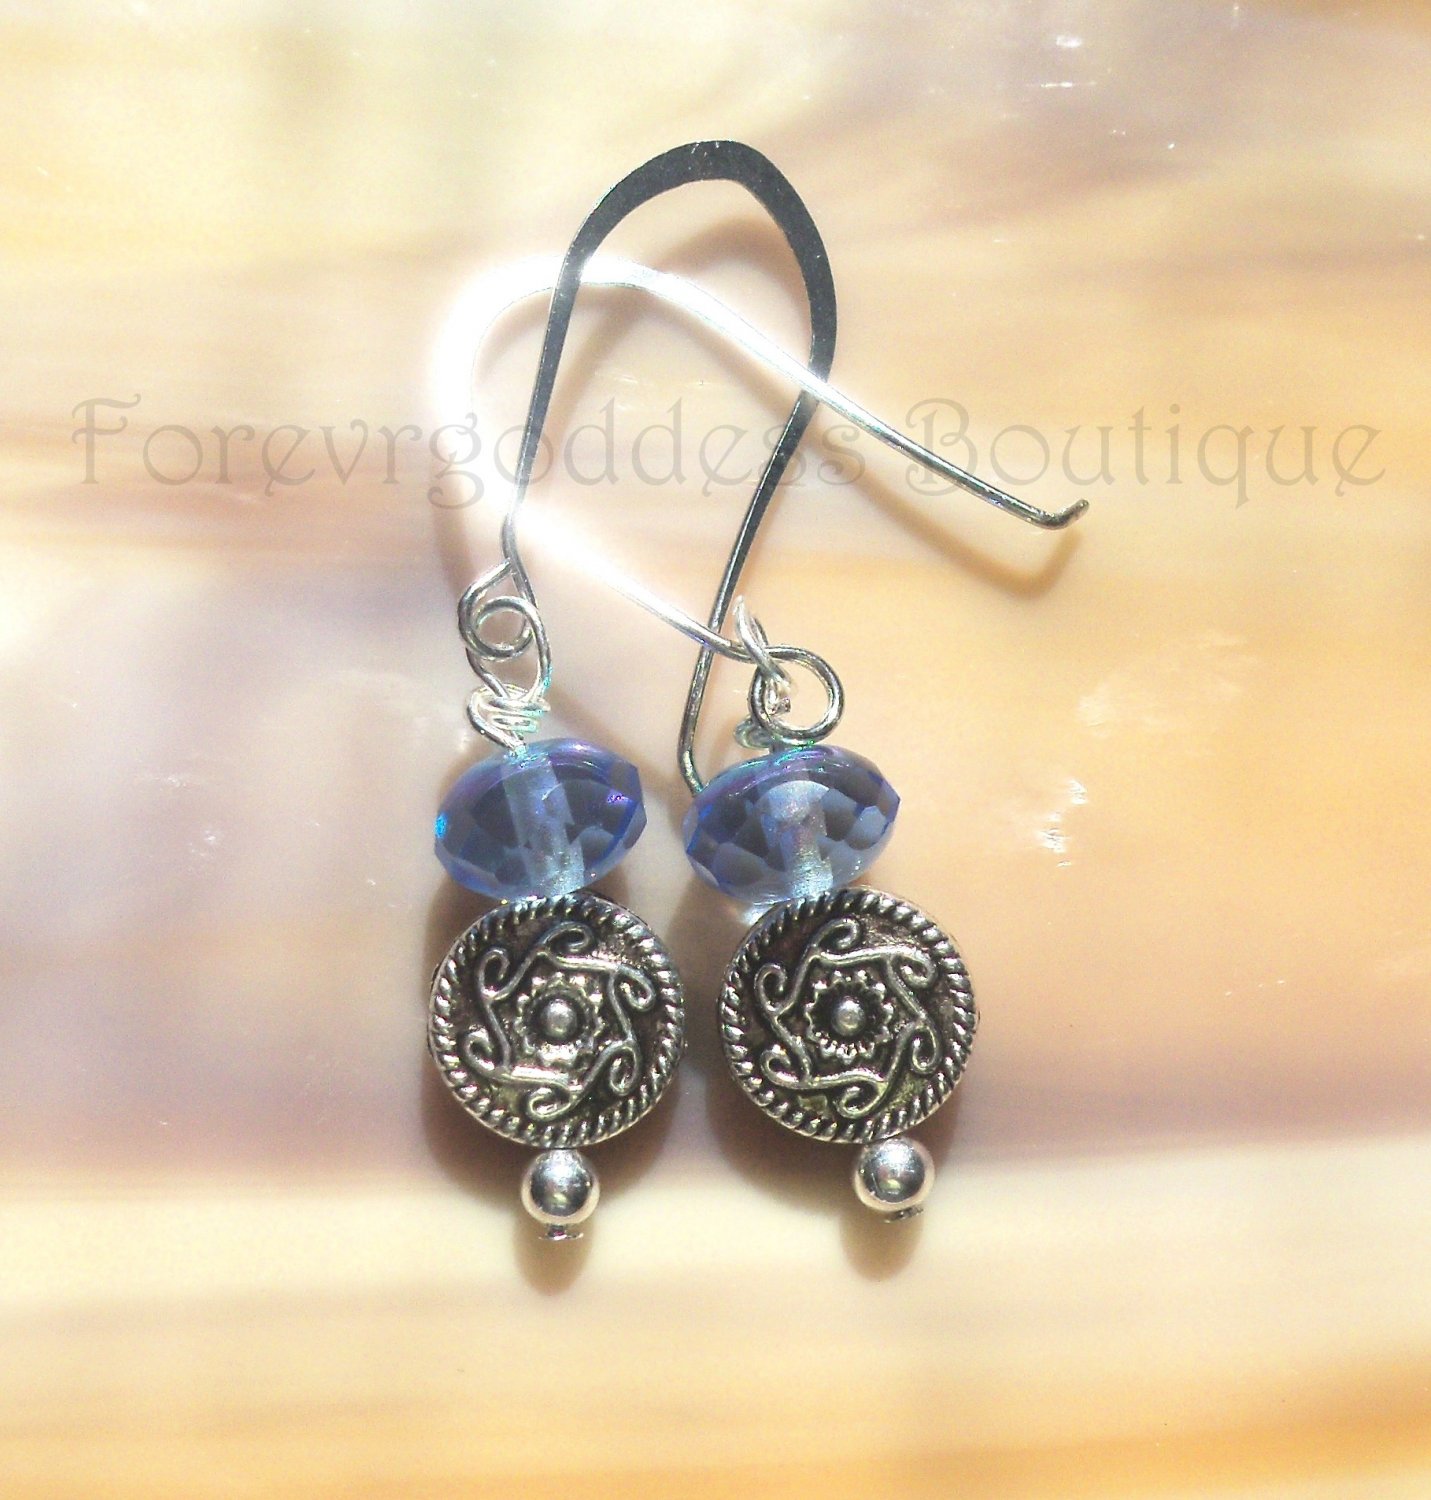 SKY Blue crystals with Indian swirls earrings